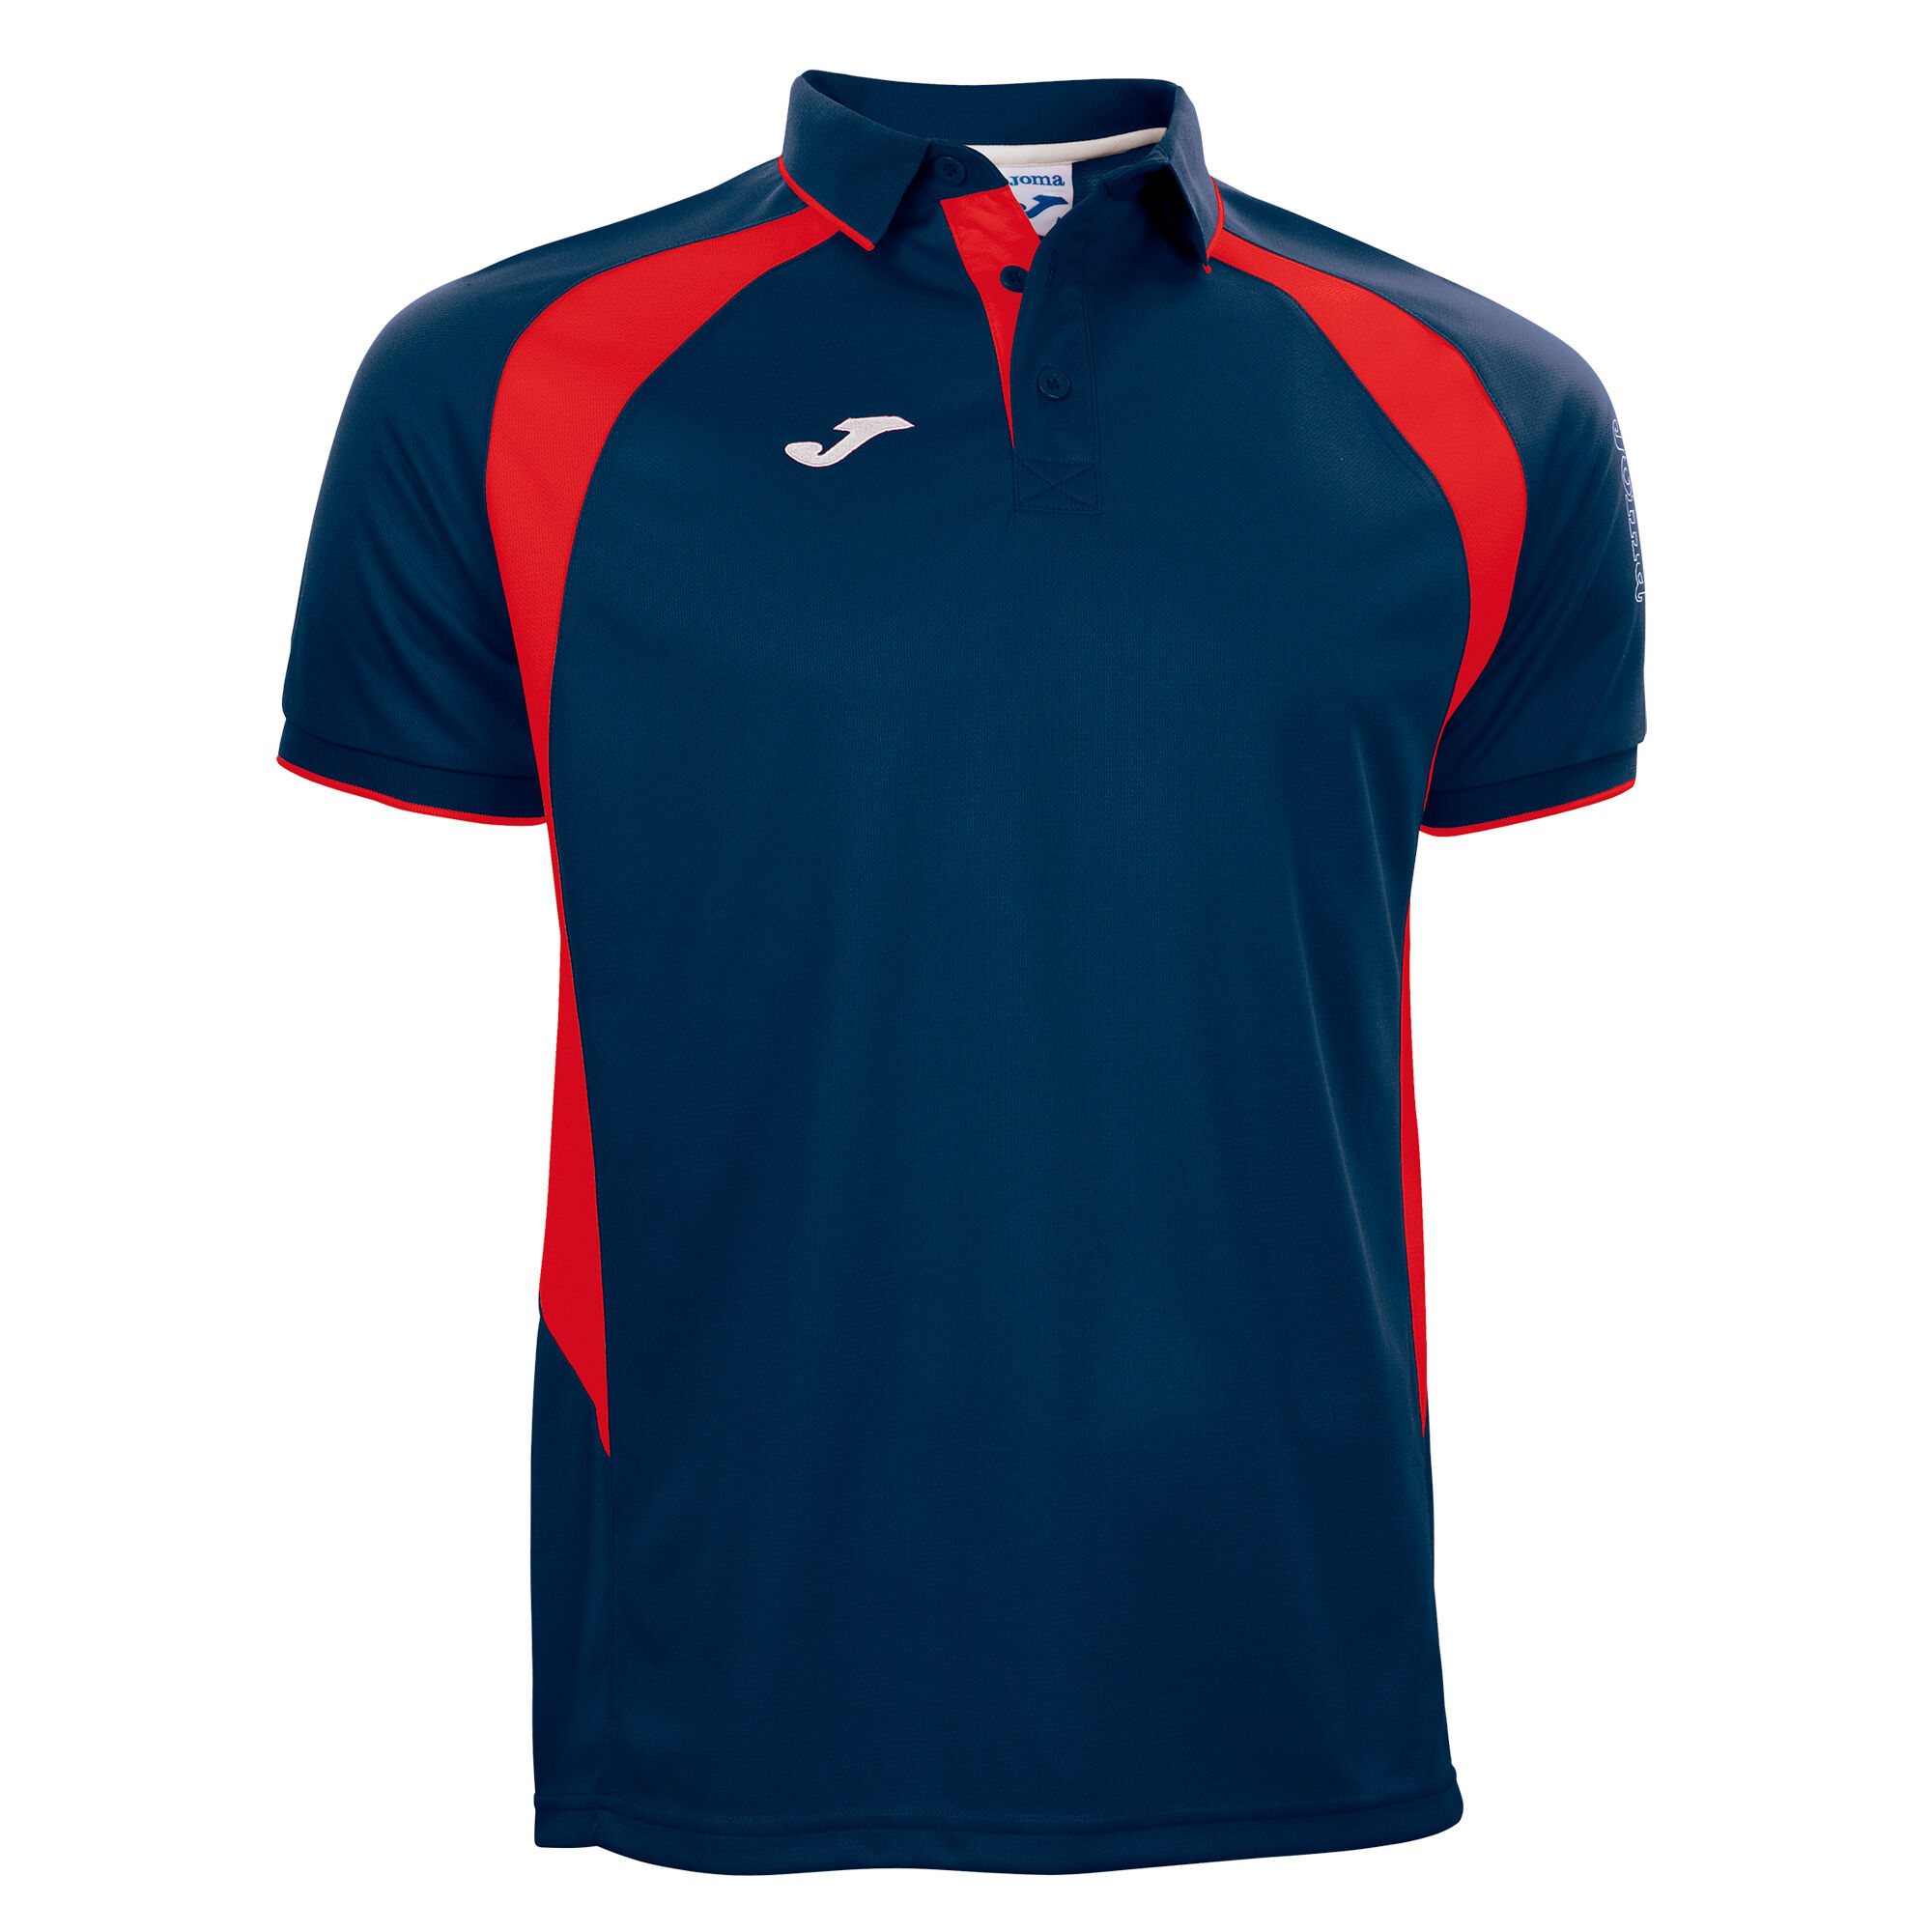 POLO MANCHES COURTES HOMME CHAMPIONSHIP III BLEU MARINE ROUGE